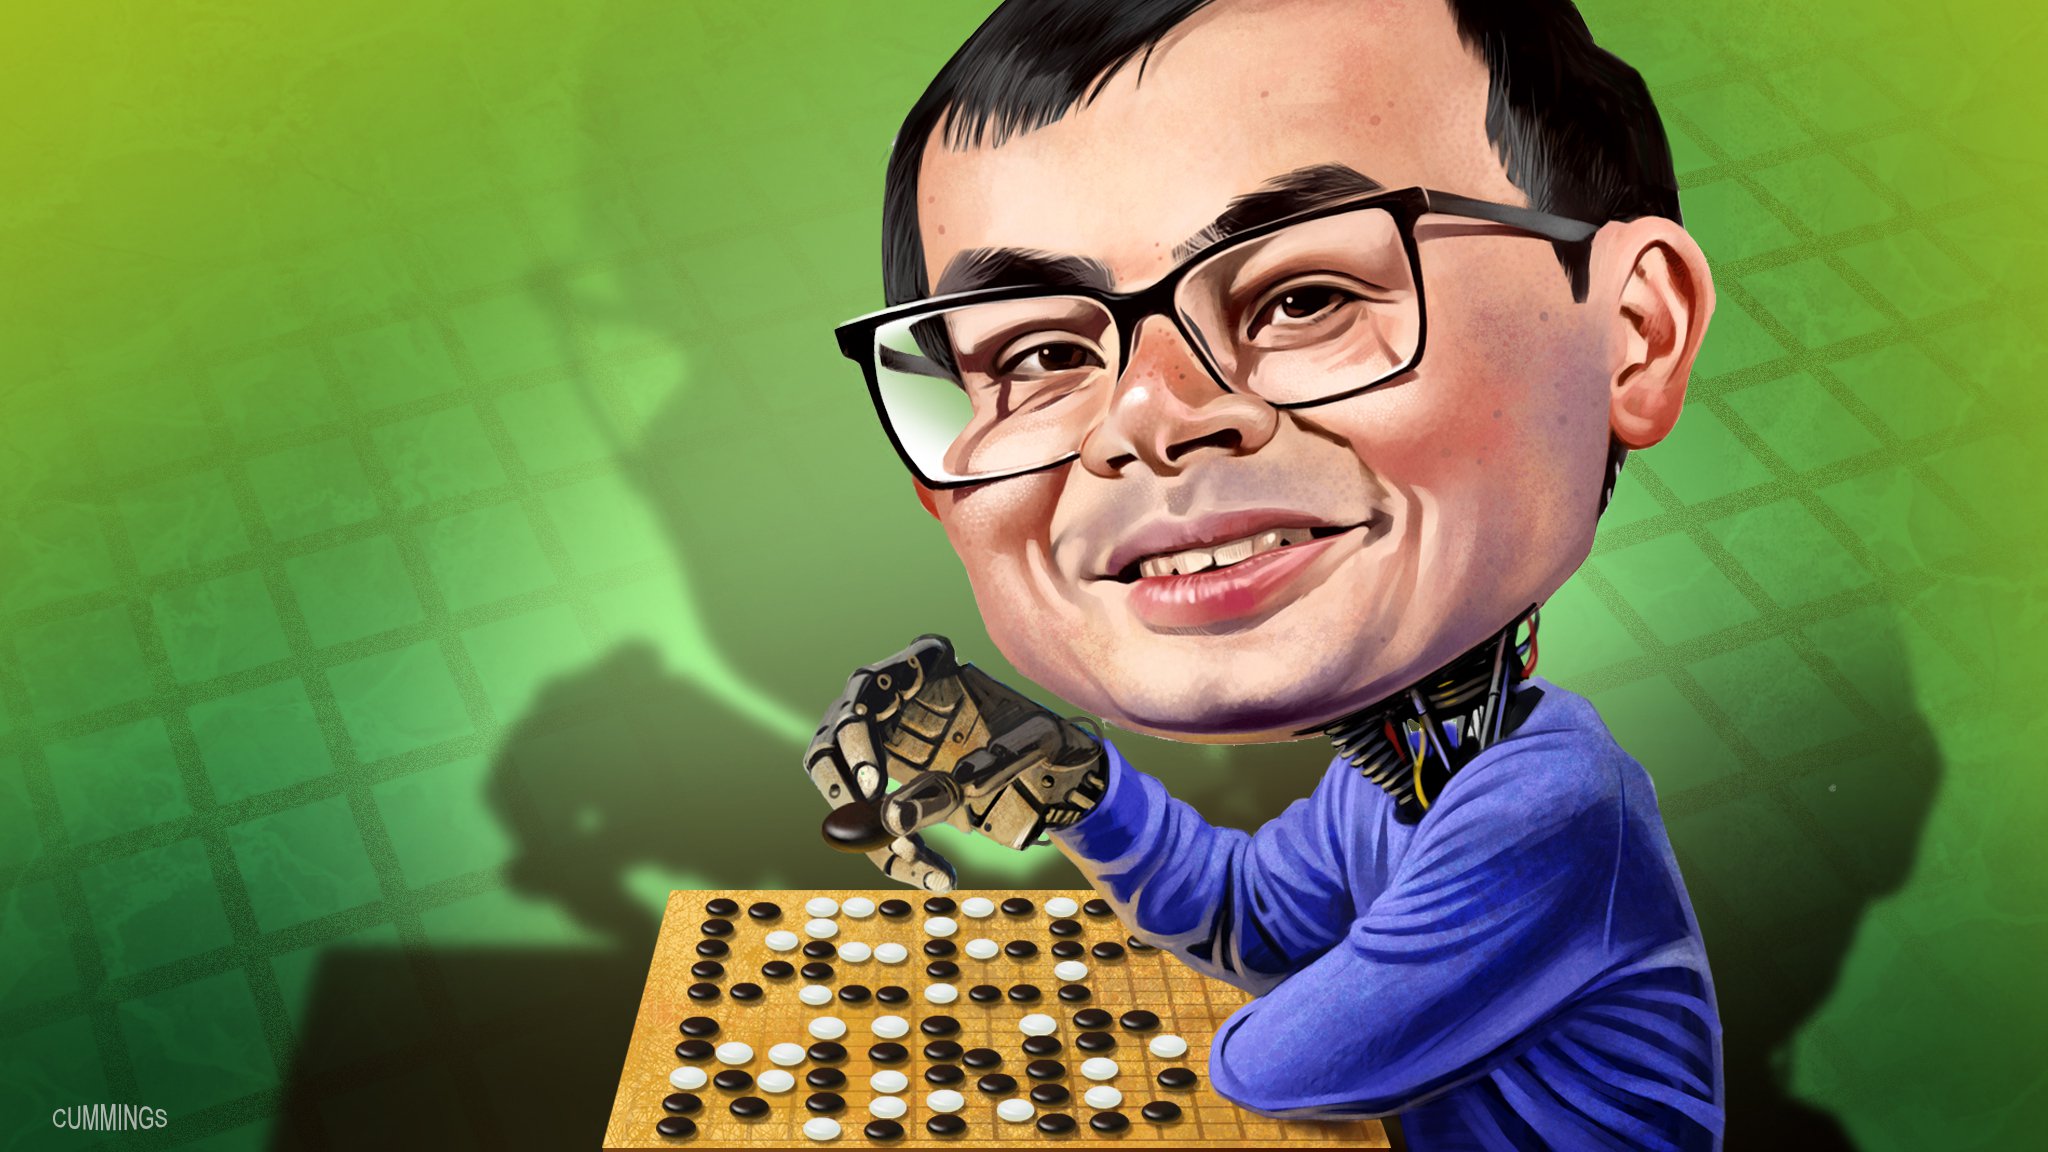 DeepMind and Google: the battle for control of artificial intelligence